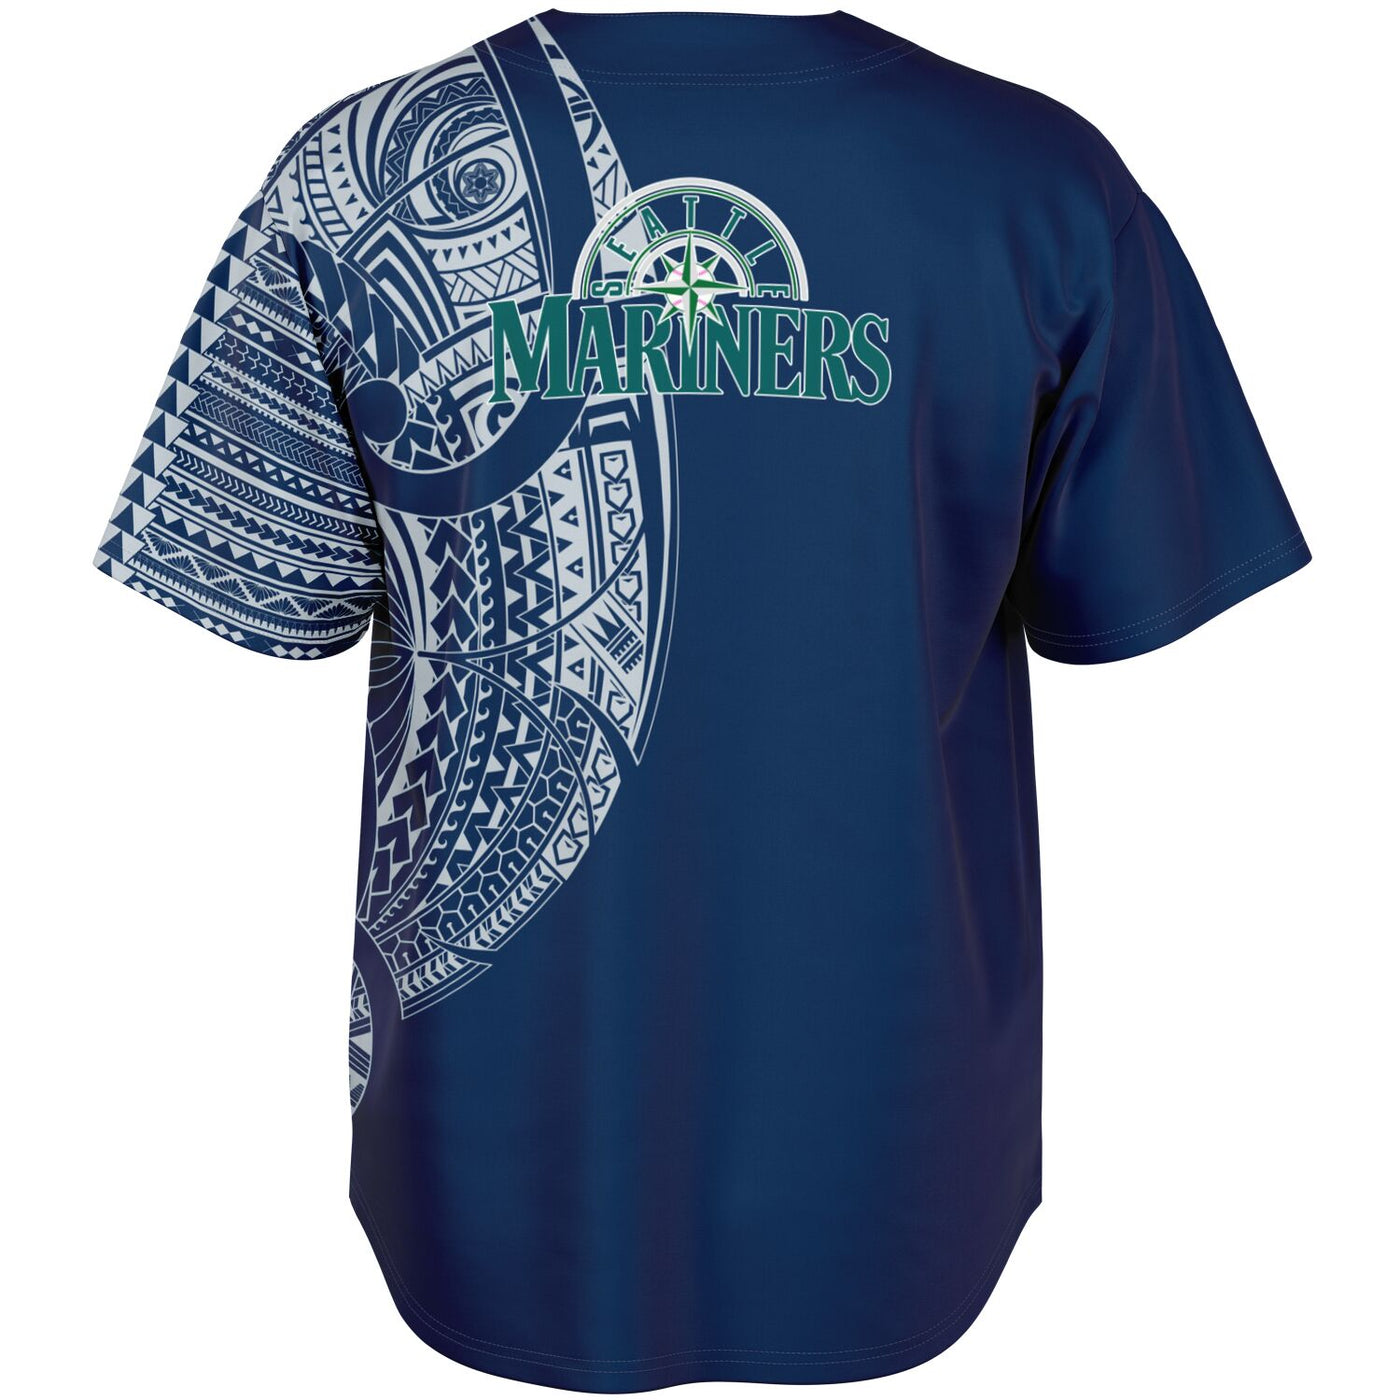 MLB Seattle Mariners Boys' Pullover Team Jersey - S